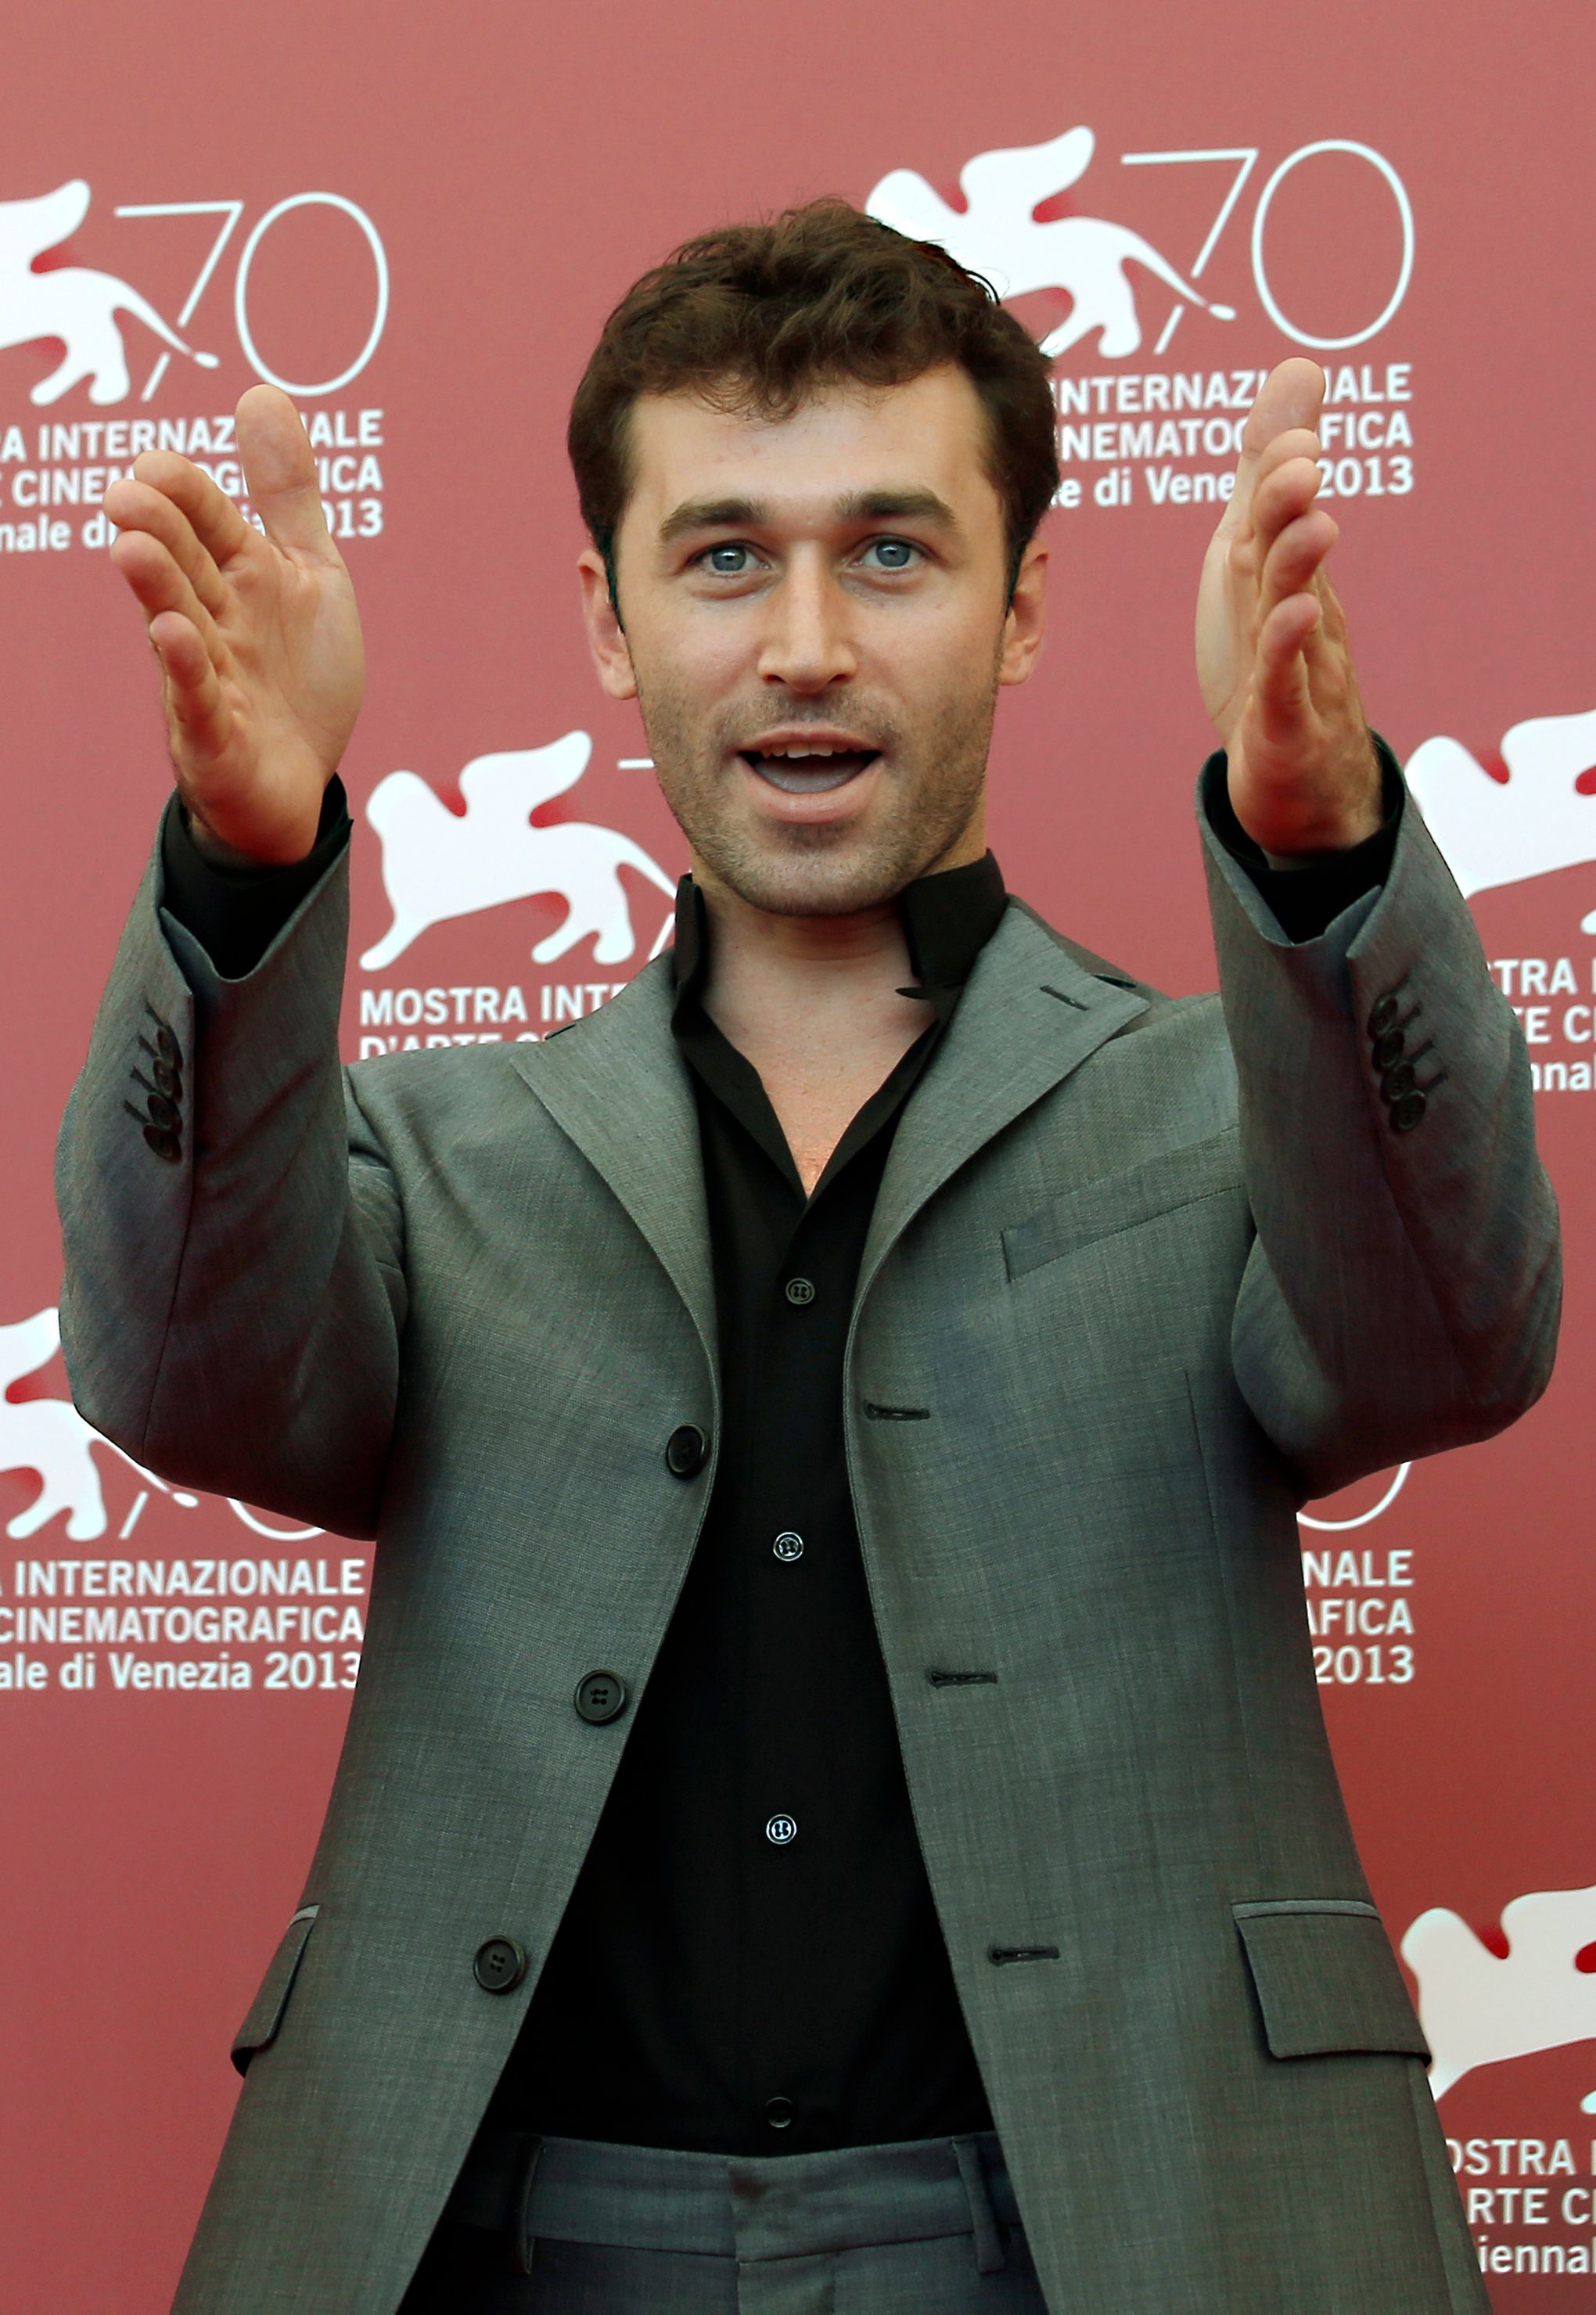 James Deen porn company cited for failing to use condoms | The Seattle Times